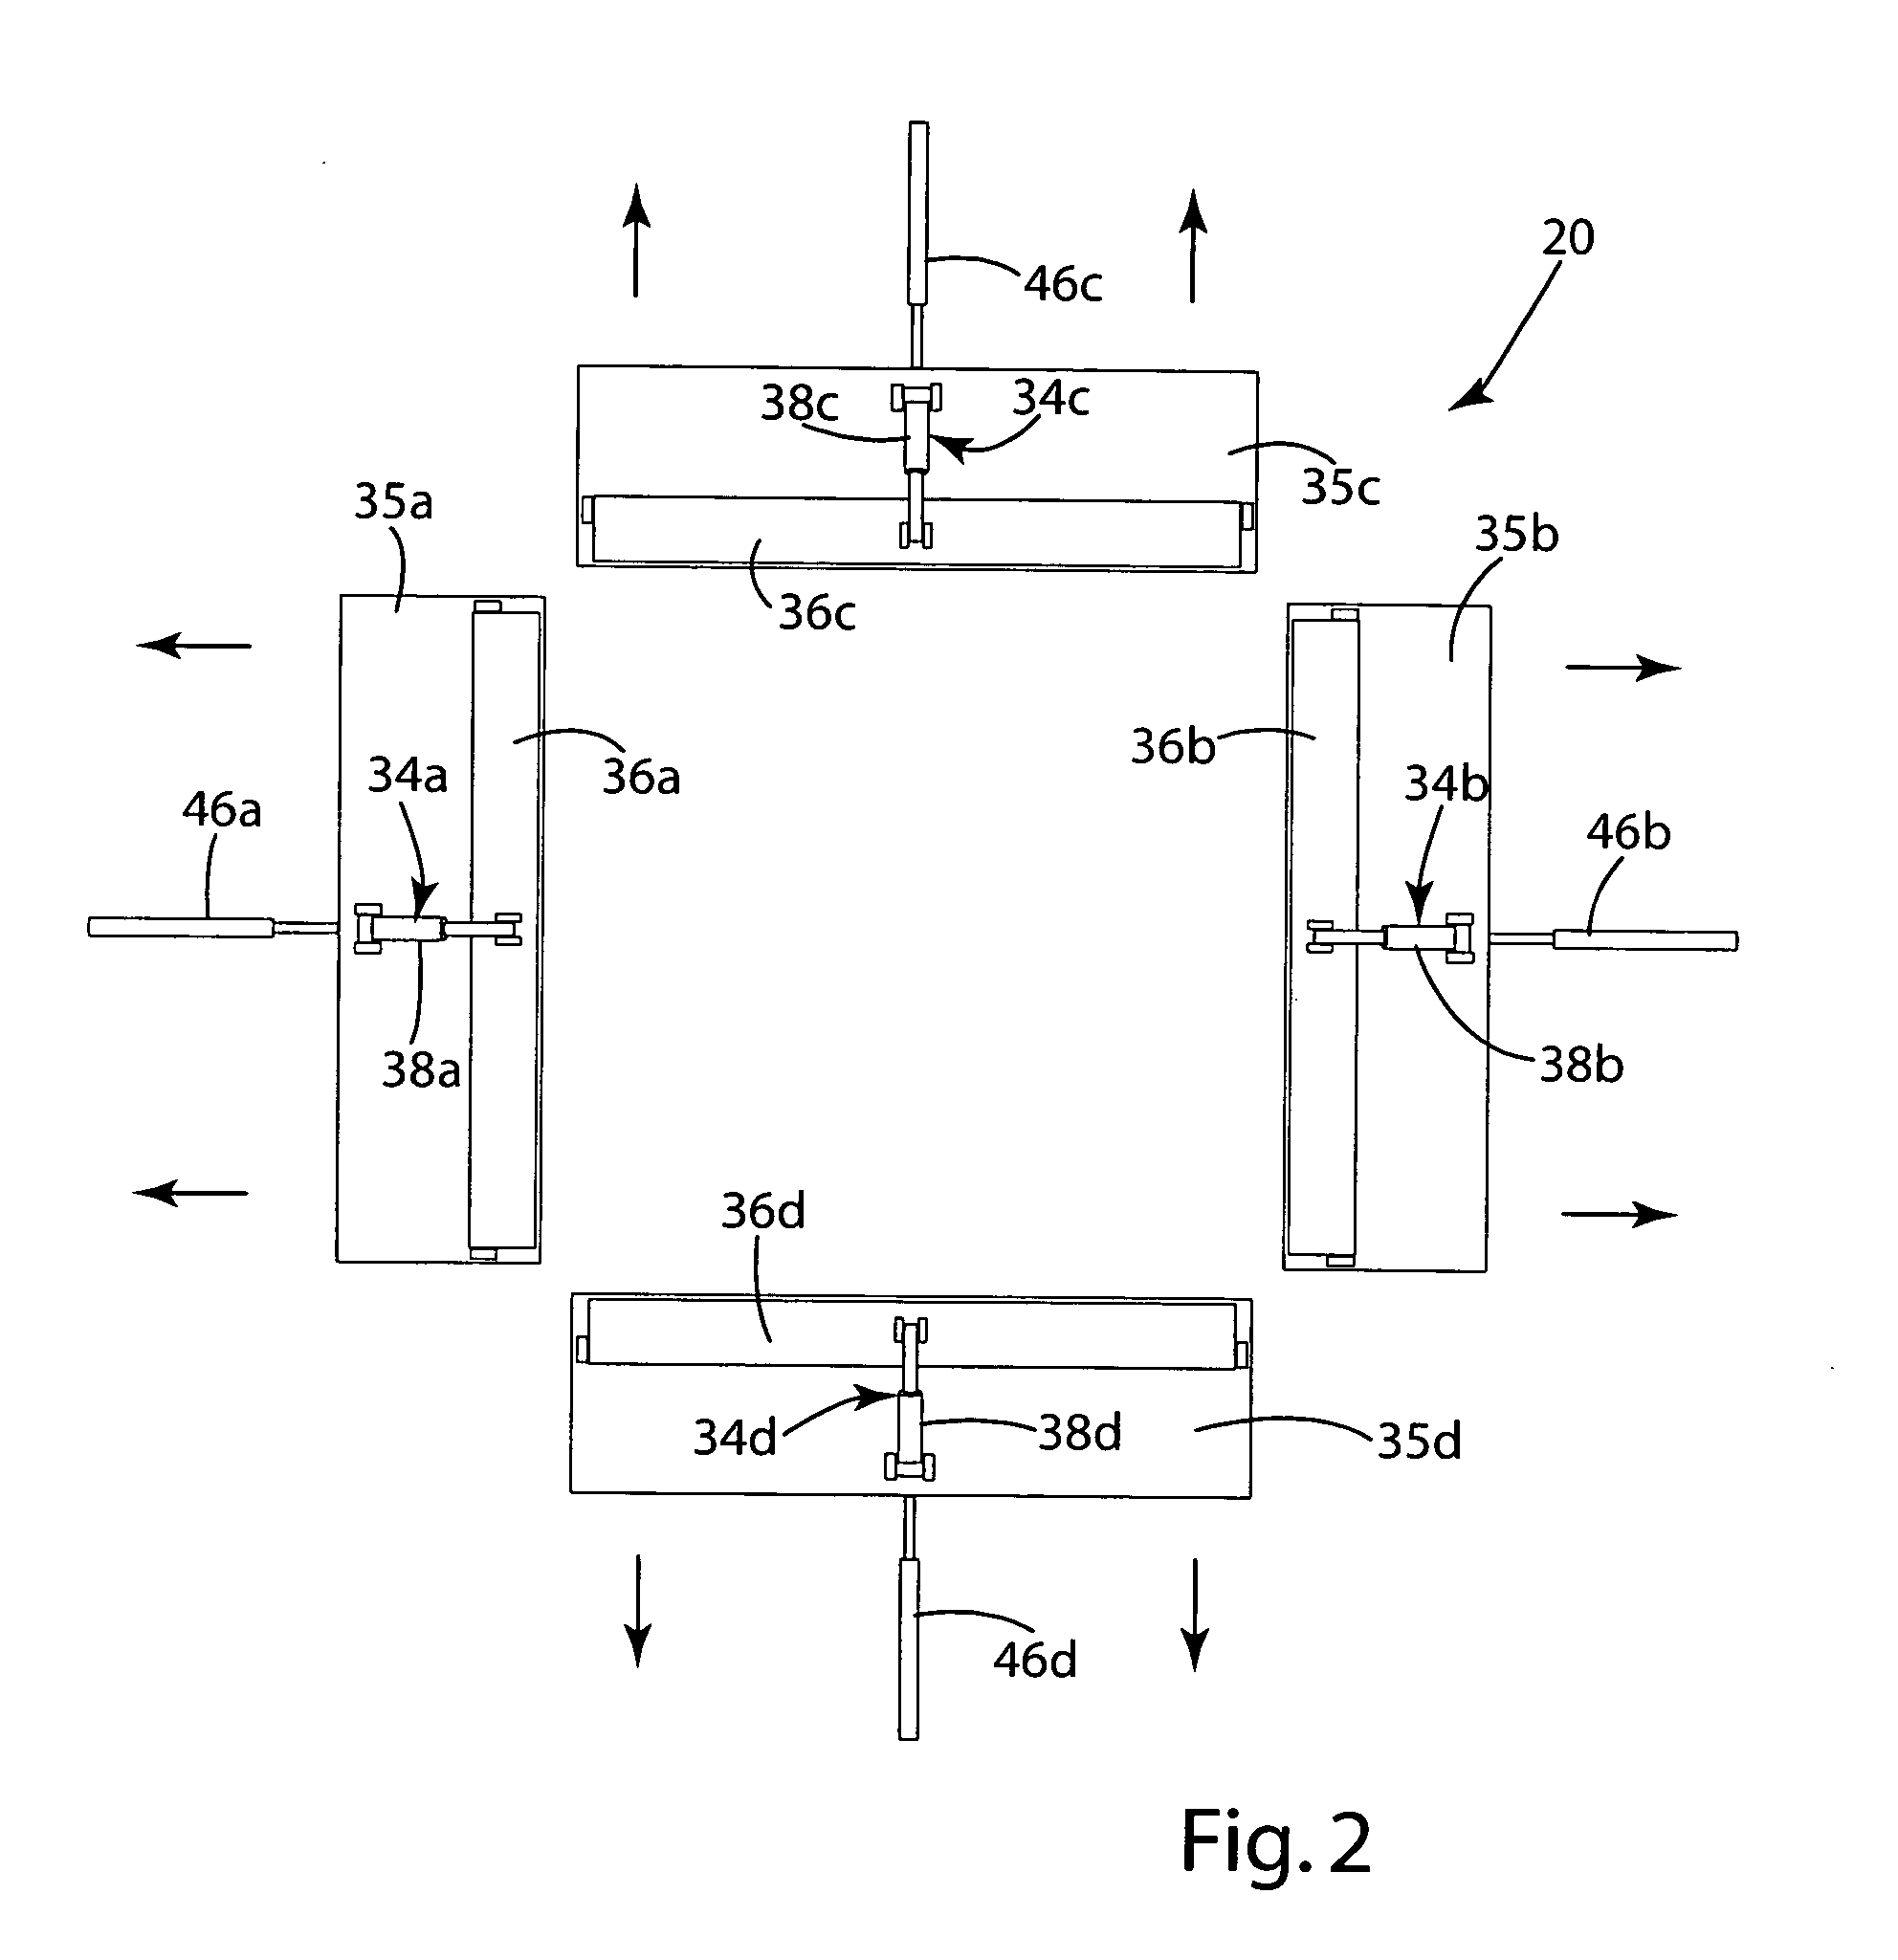 Method and apparatus for manufacturing load bearing fabric support structures